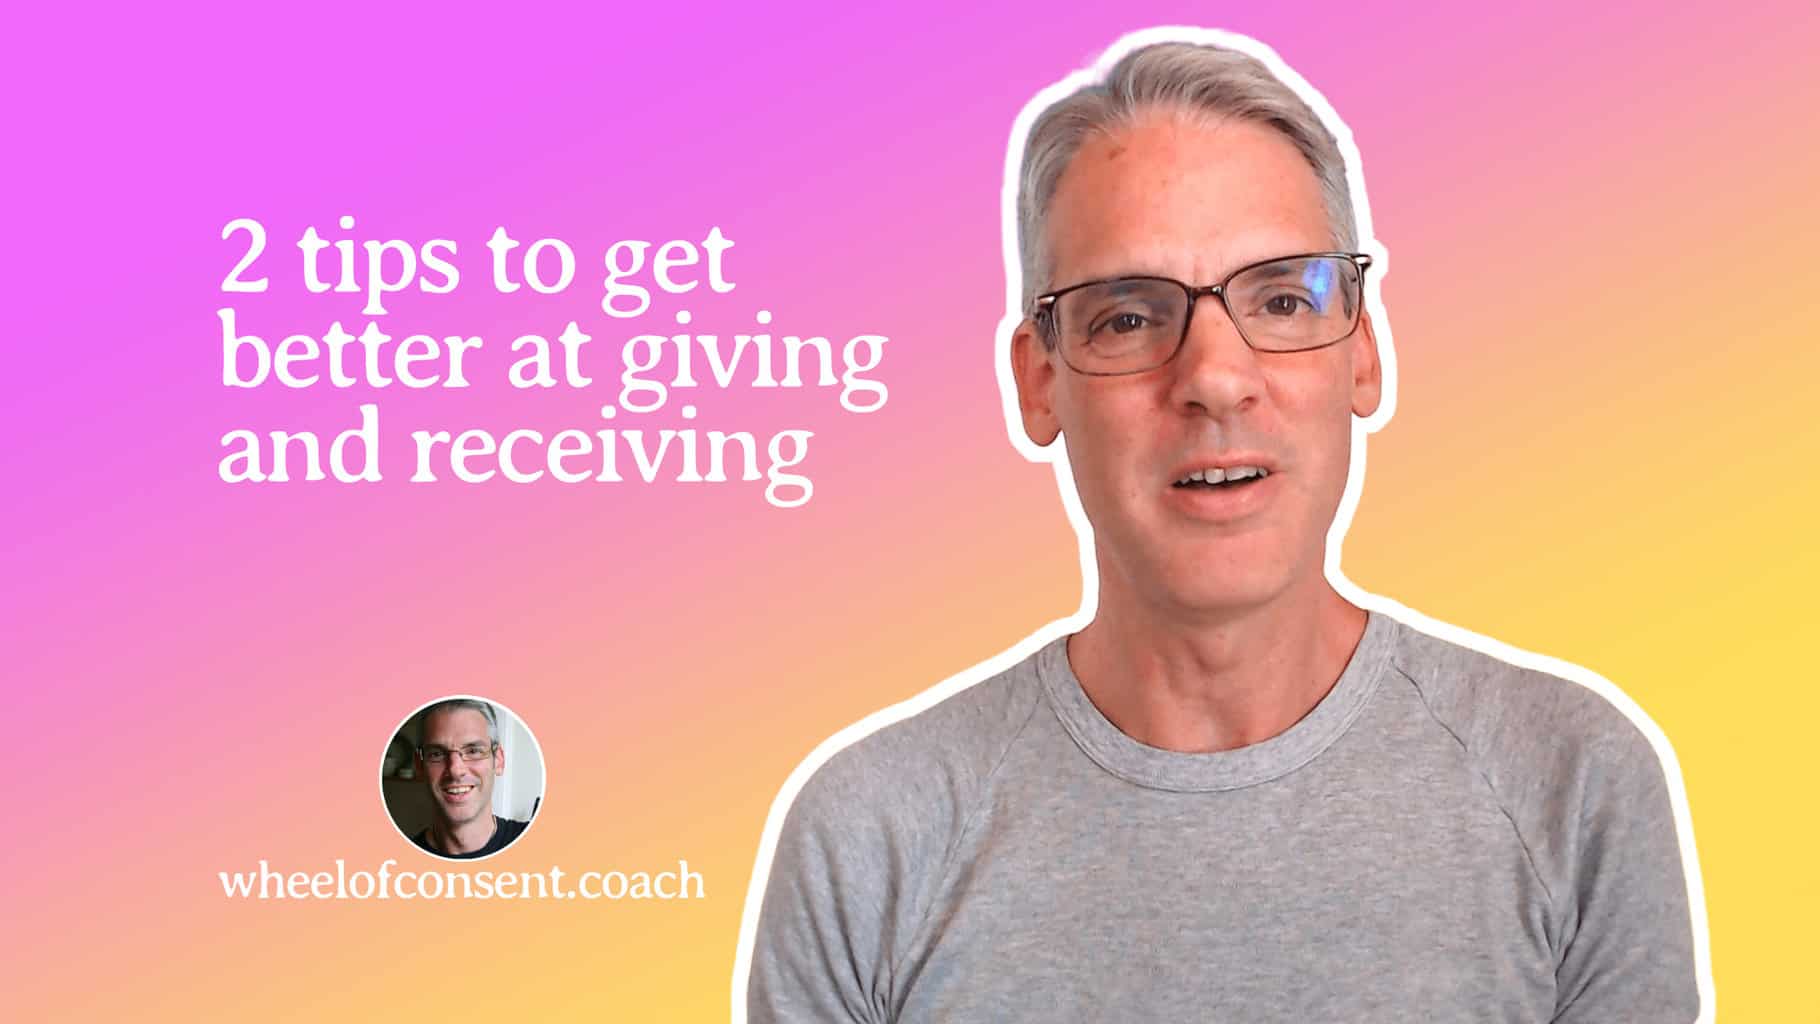 2-tips-to-get-better-at-giving-receiving